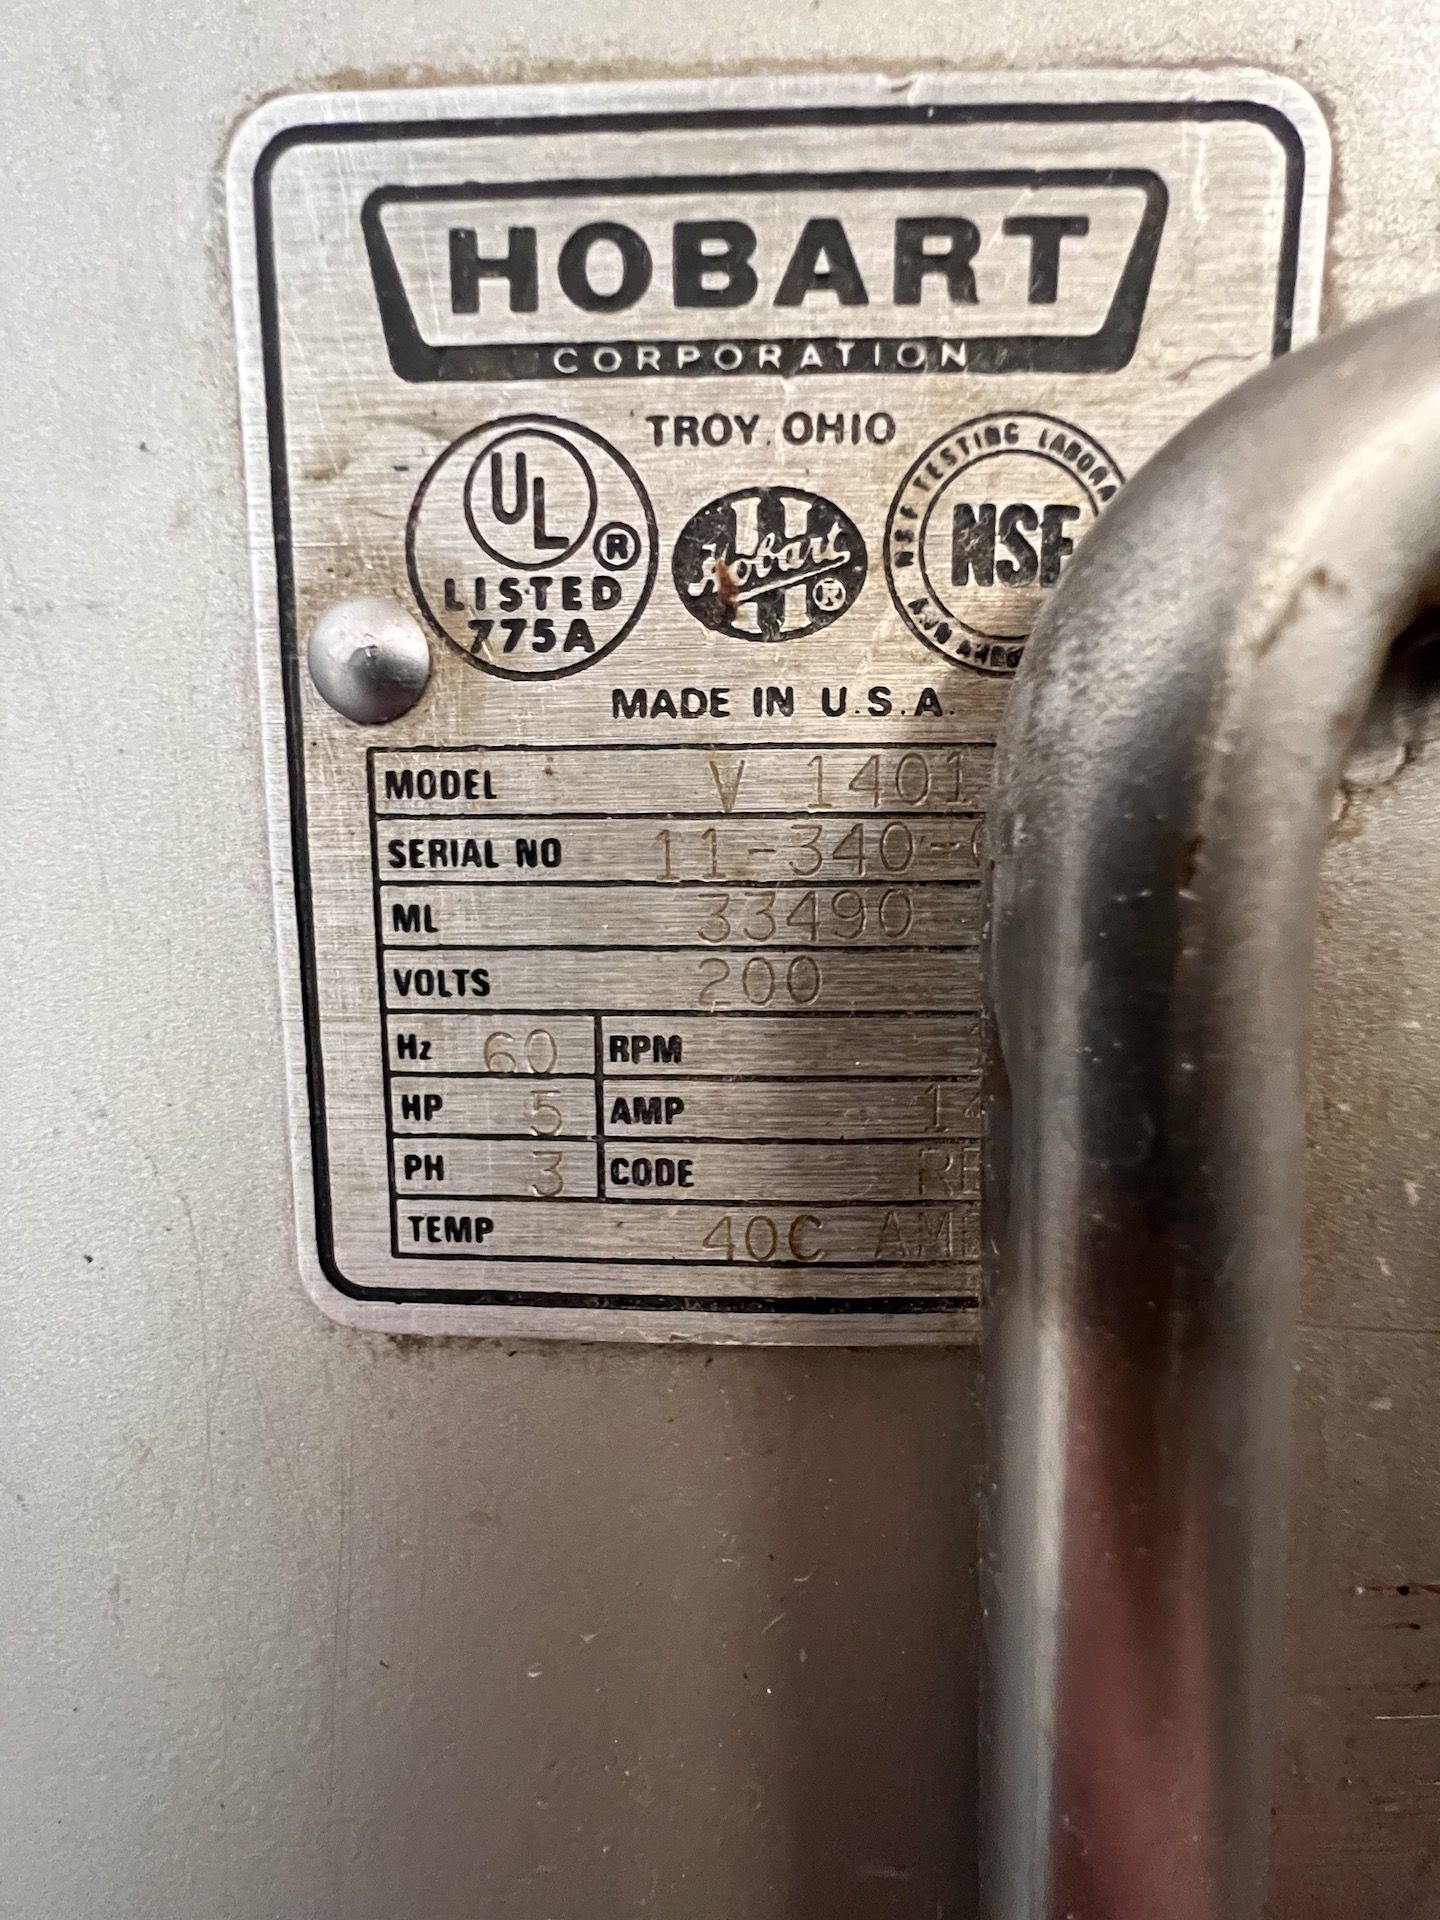 HOBART MIXER, MODEL Q1401, S/N 11-340-0, 140 QUART, WITH BEATER ATTACHMENT, MIXING BOWL AND DOLLY - Image 8 of 8